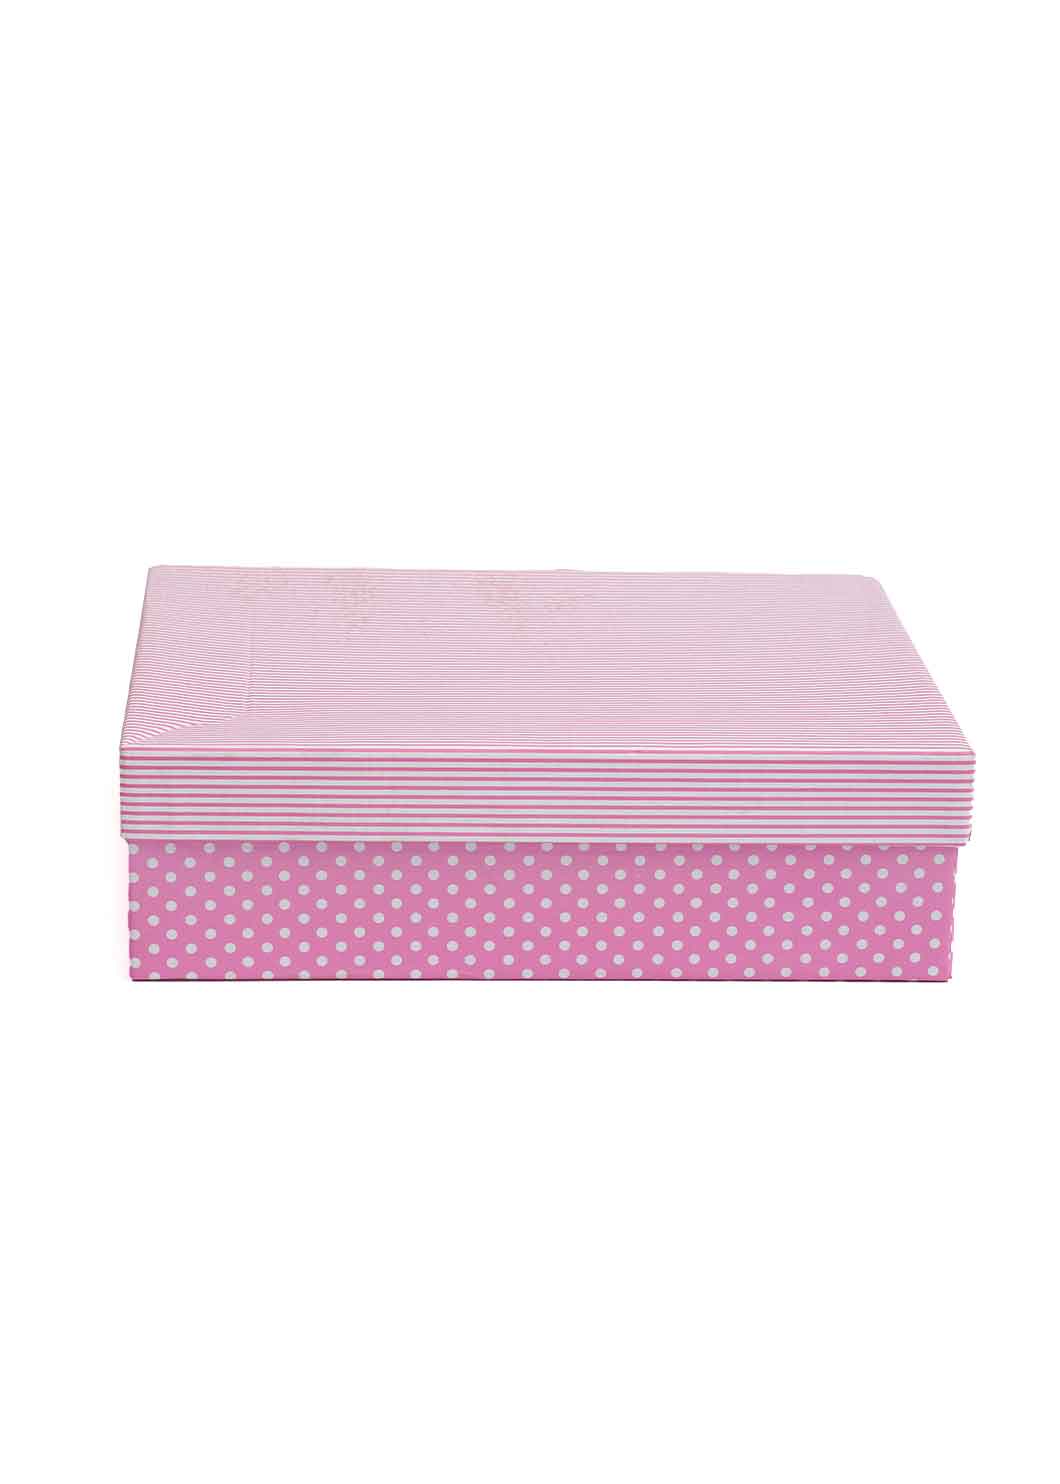 Dotted Base With Line Cover Gift Packing Box - 2 Colors 14x11 in Gift Packaging Box